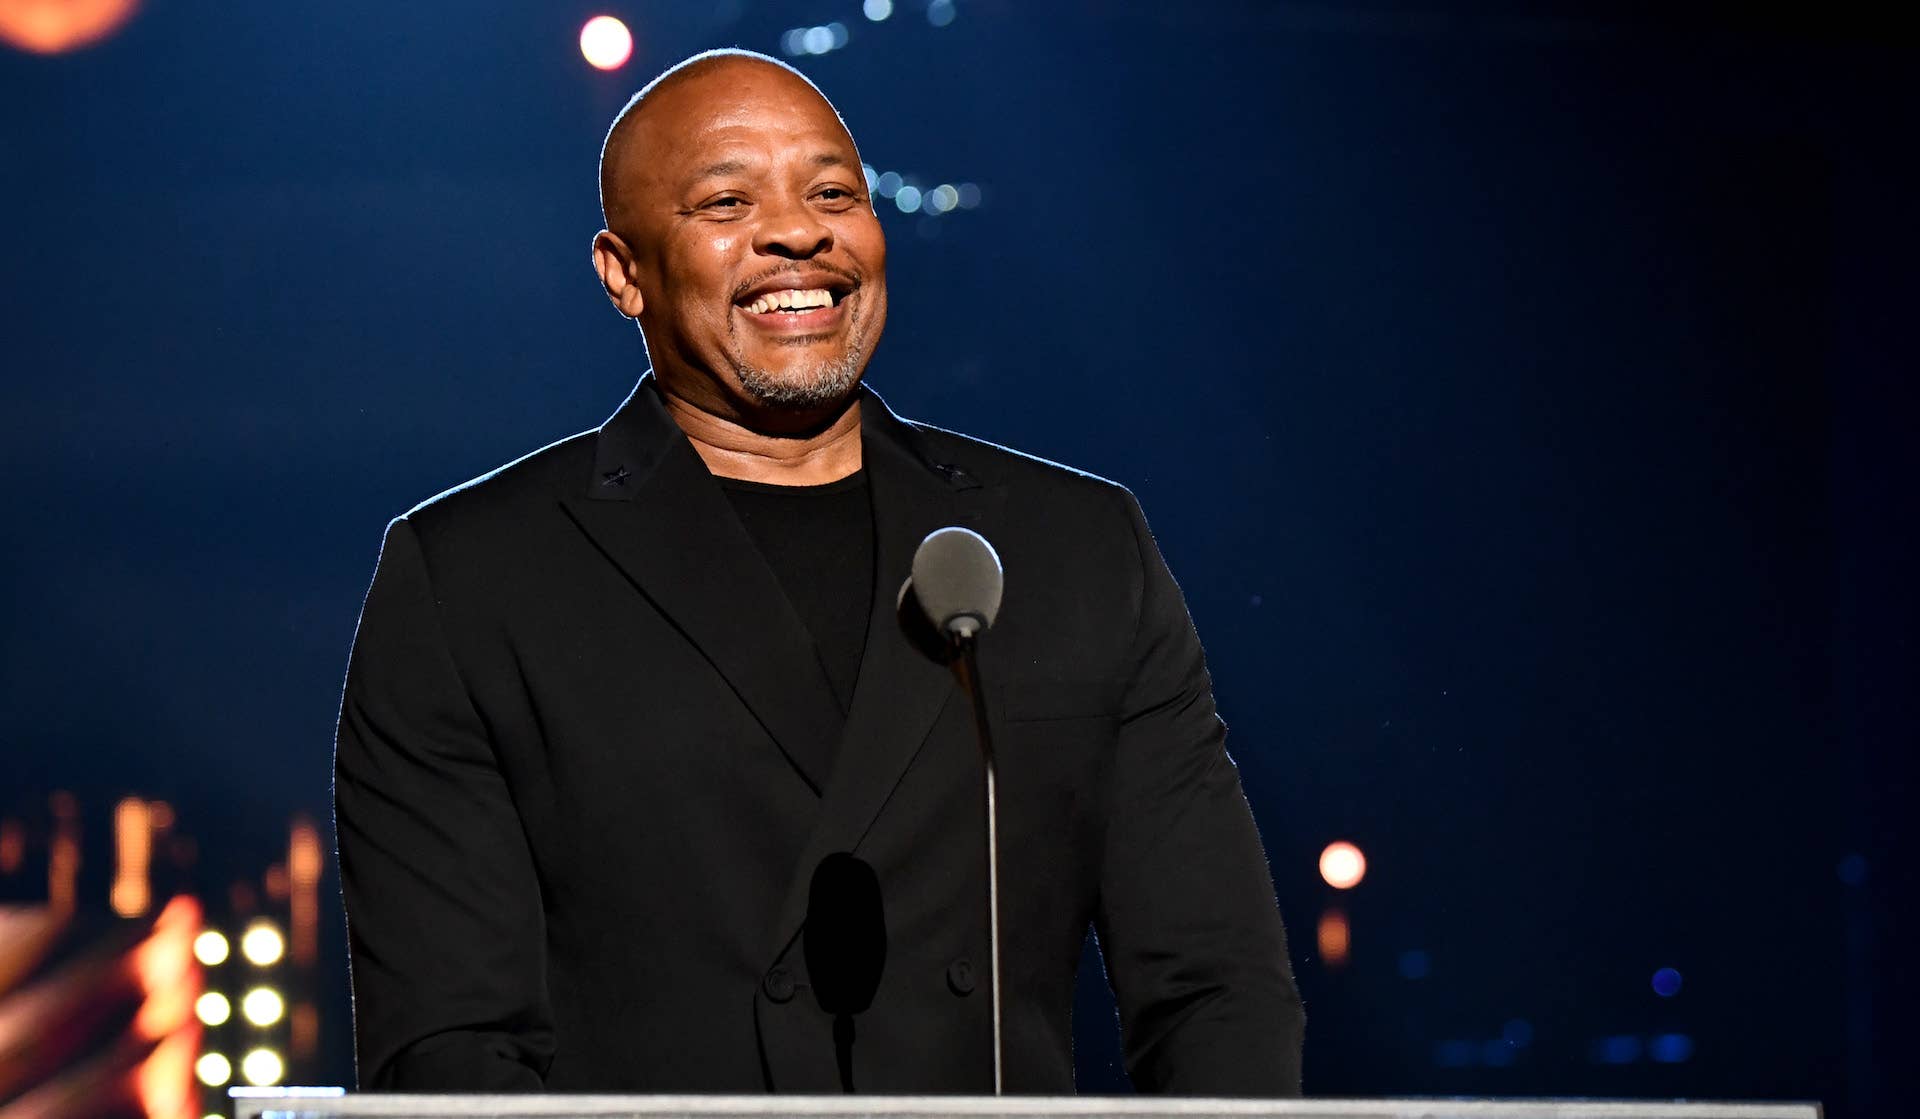 Dr. Dre speaking at The Rock and Roll Hall of Fame